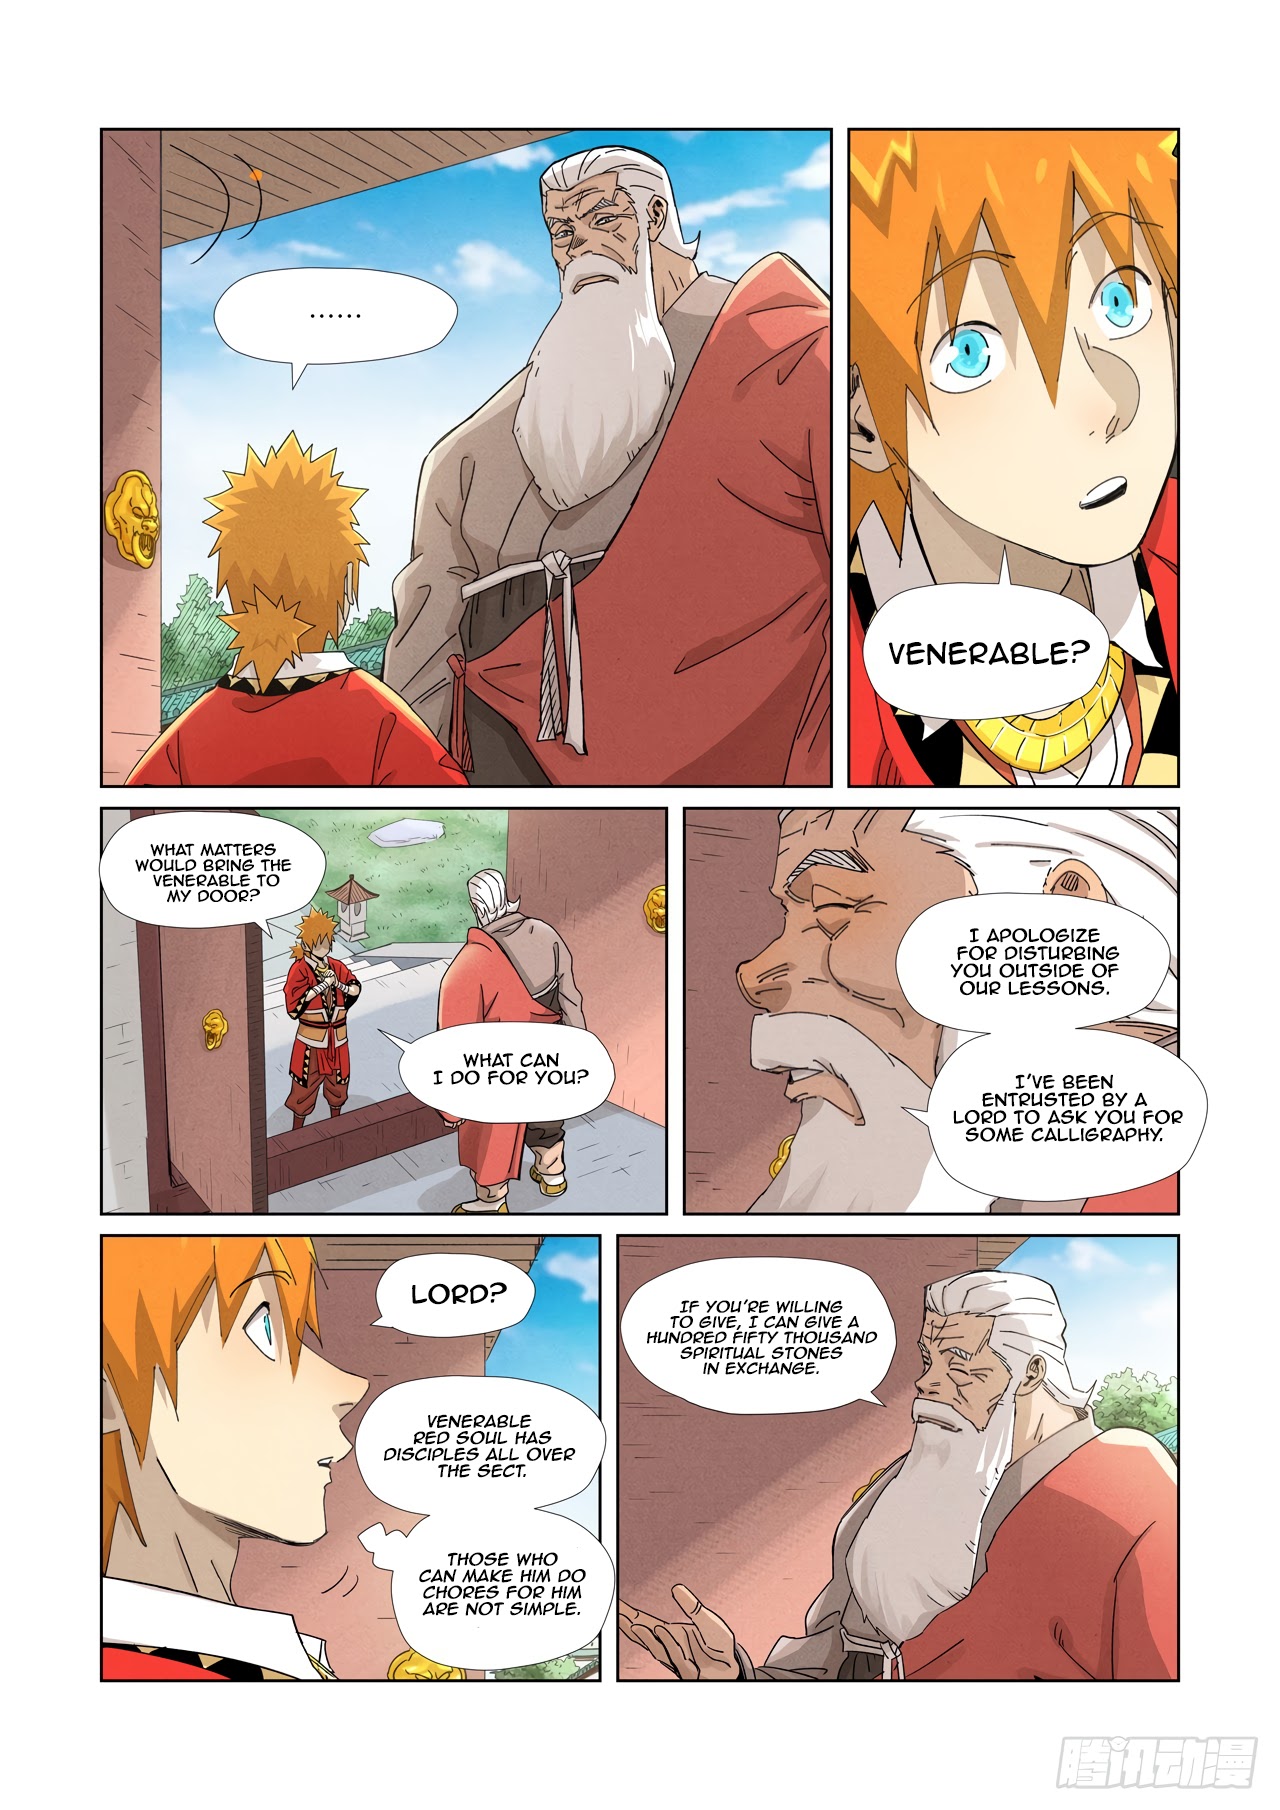 Tales of Demons and Gods chapter 345.1 page 4